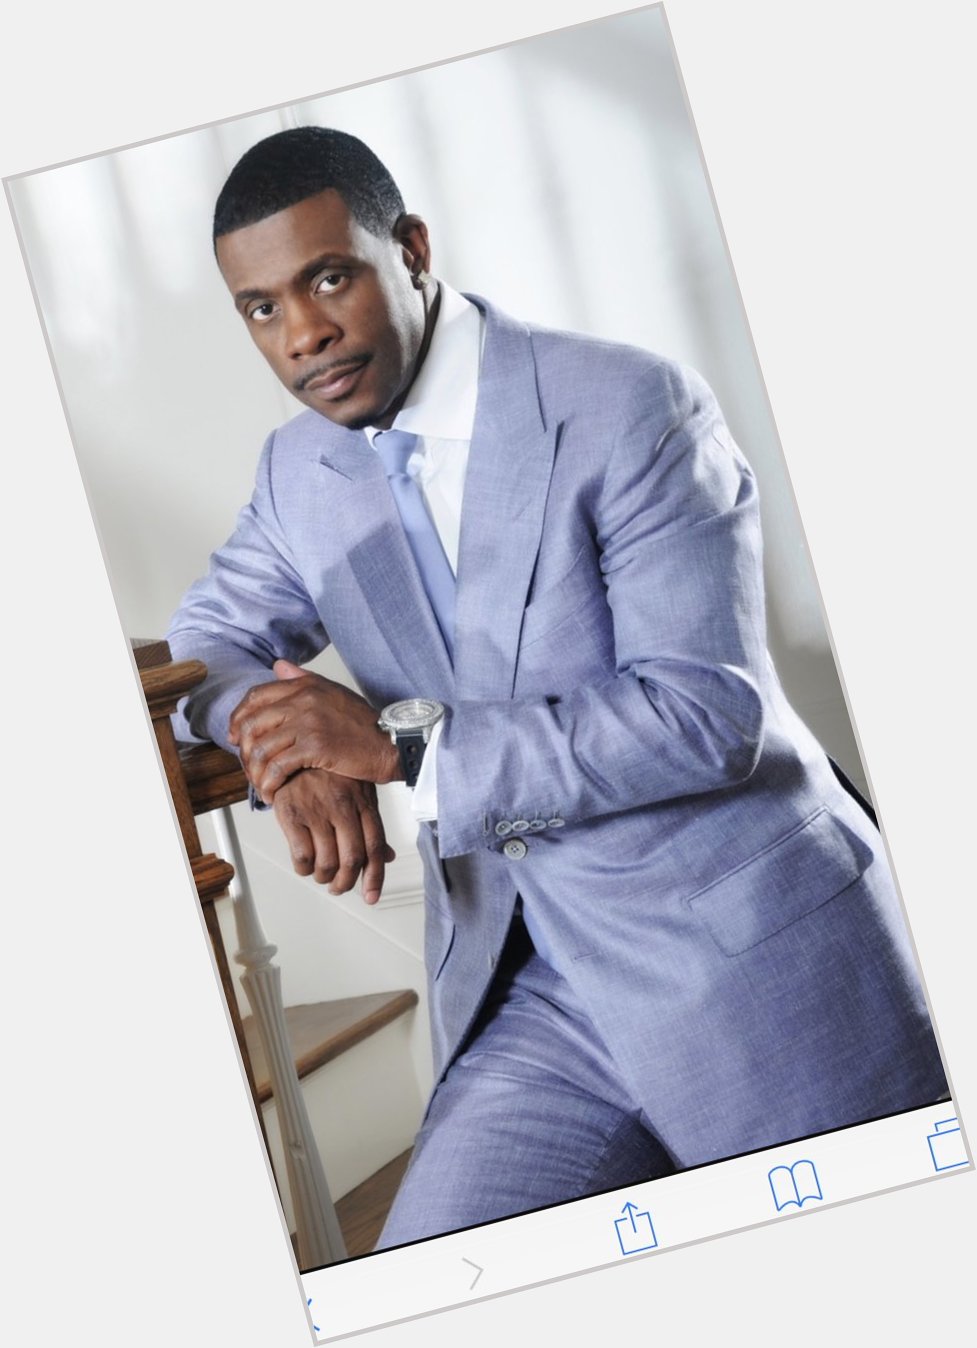 Happy birthday to the king & legend of R&B & baby making music keith sweat 